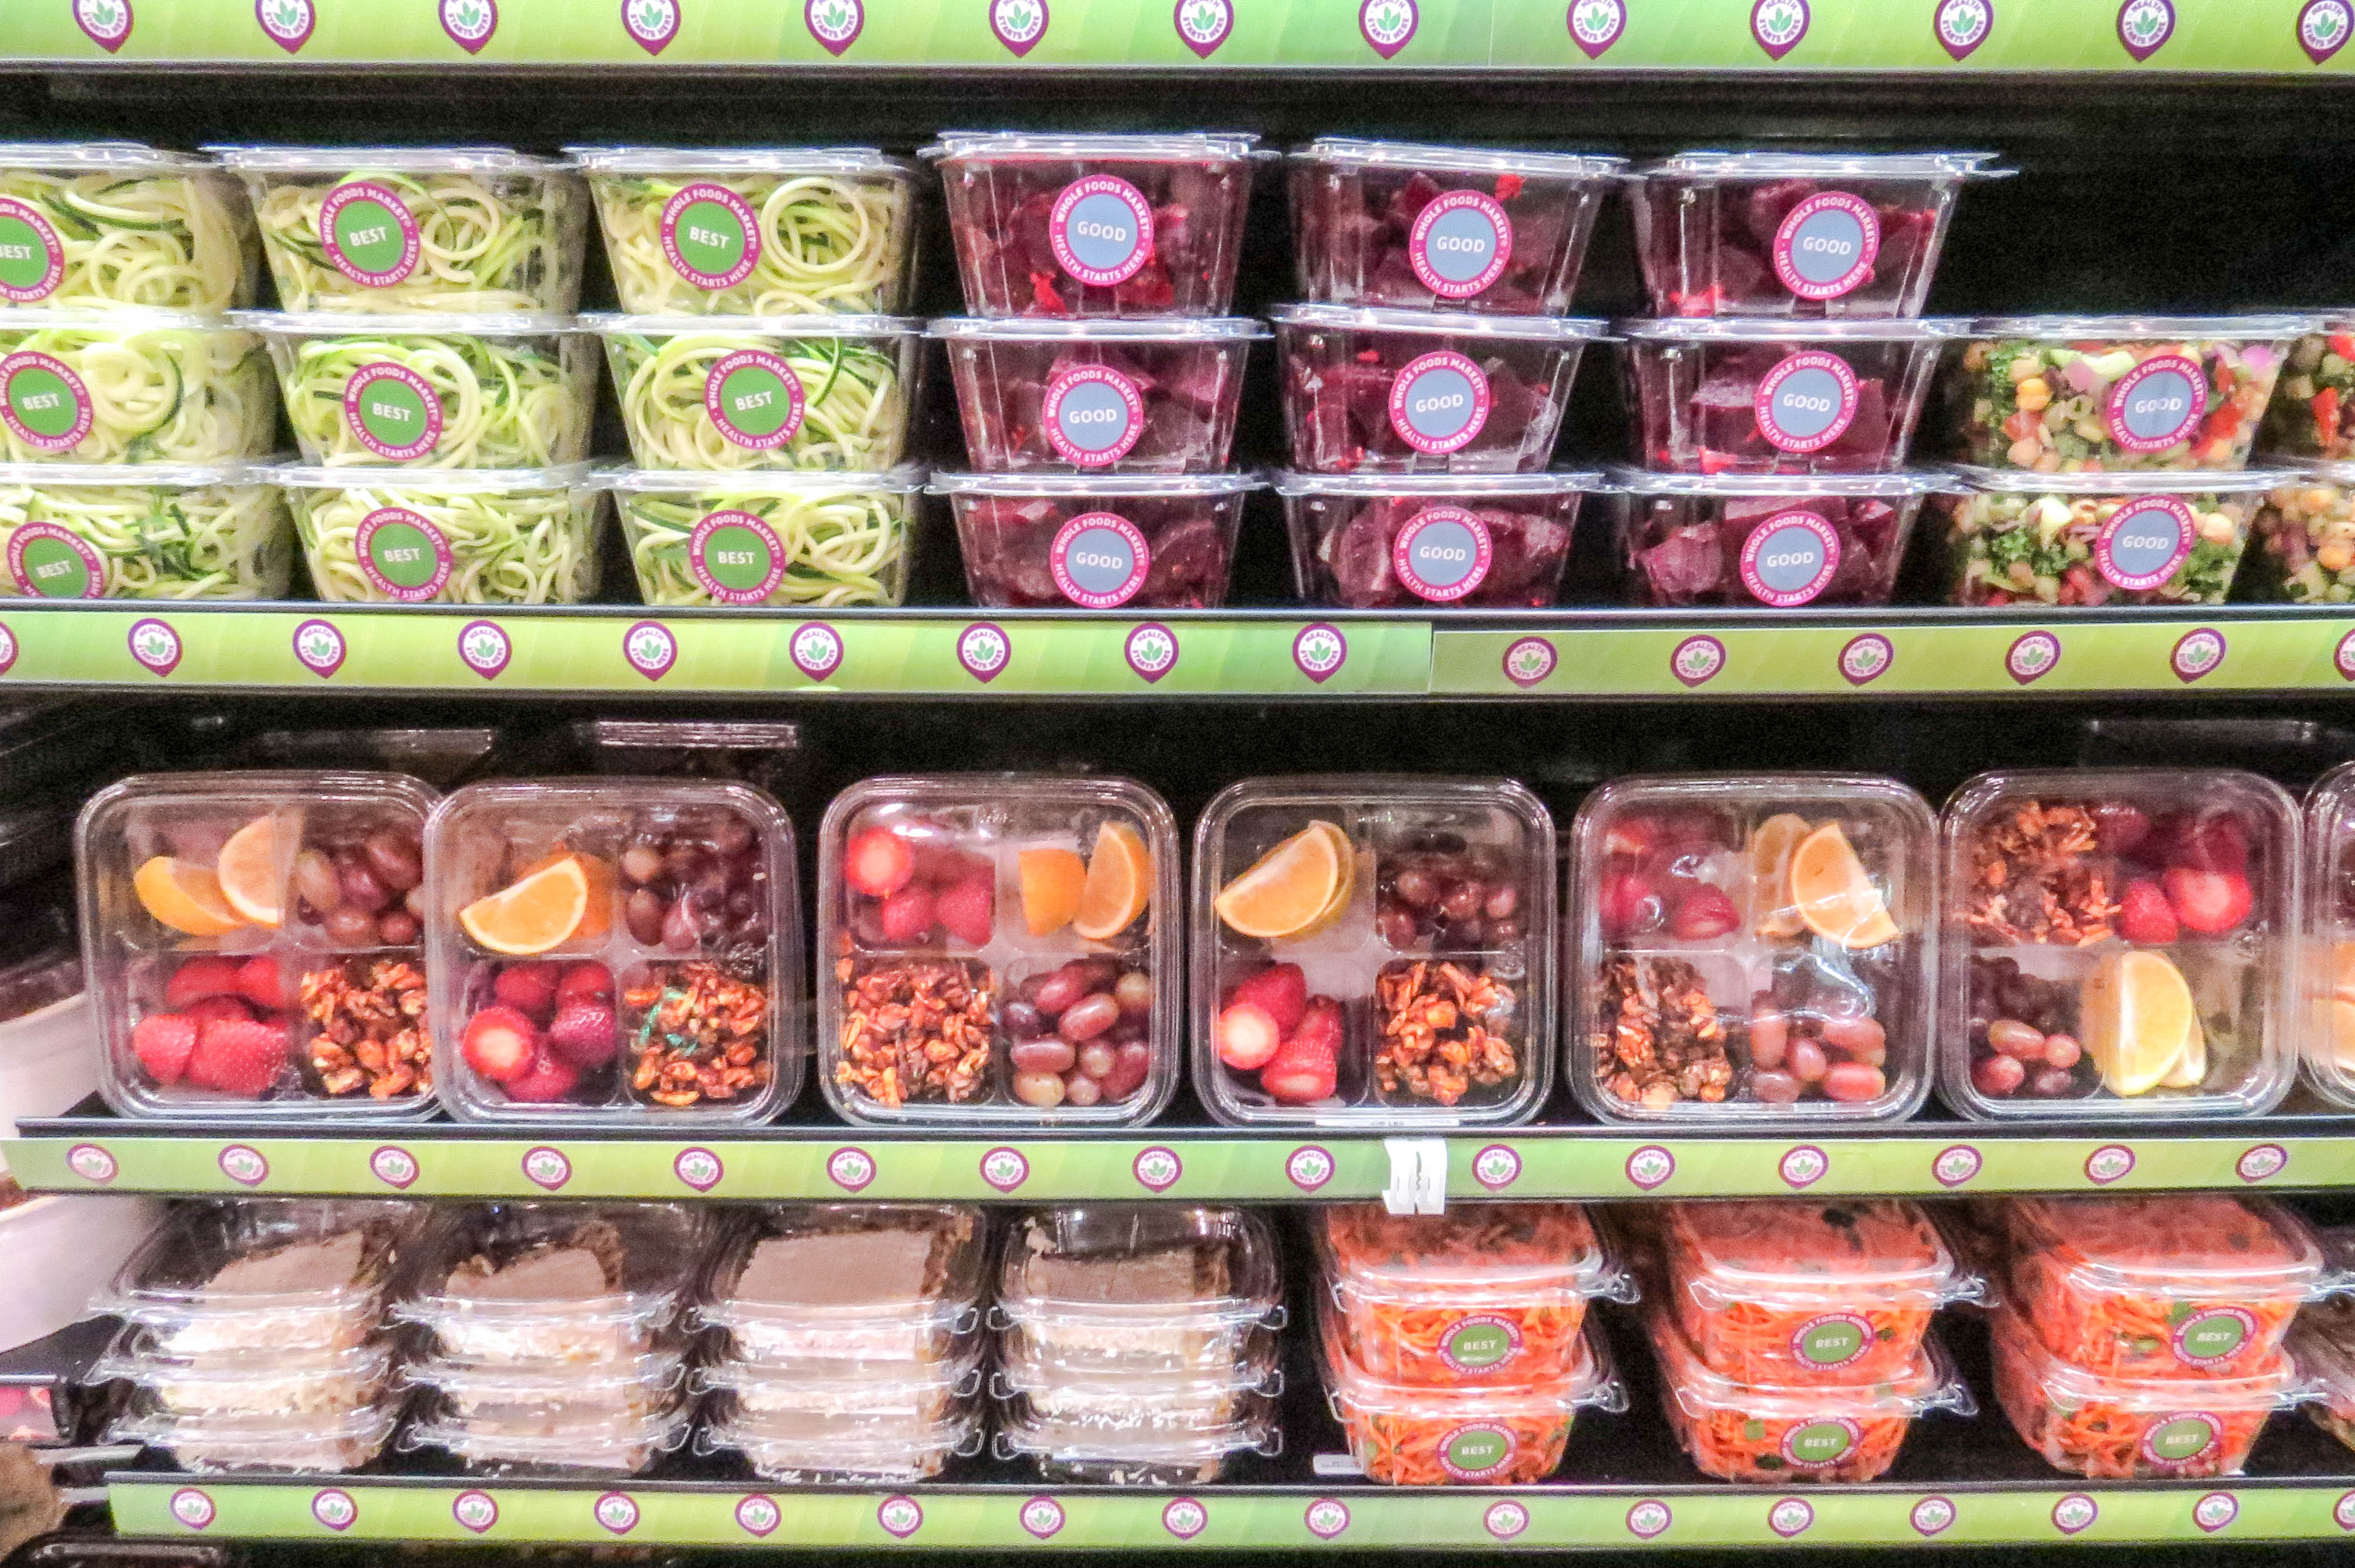 Your Healthy Meal Guide at the Whole Foods Flagship in Austin